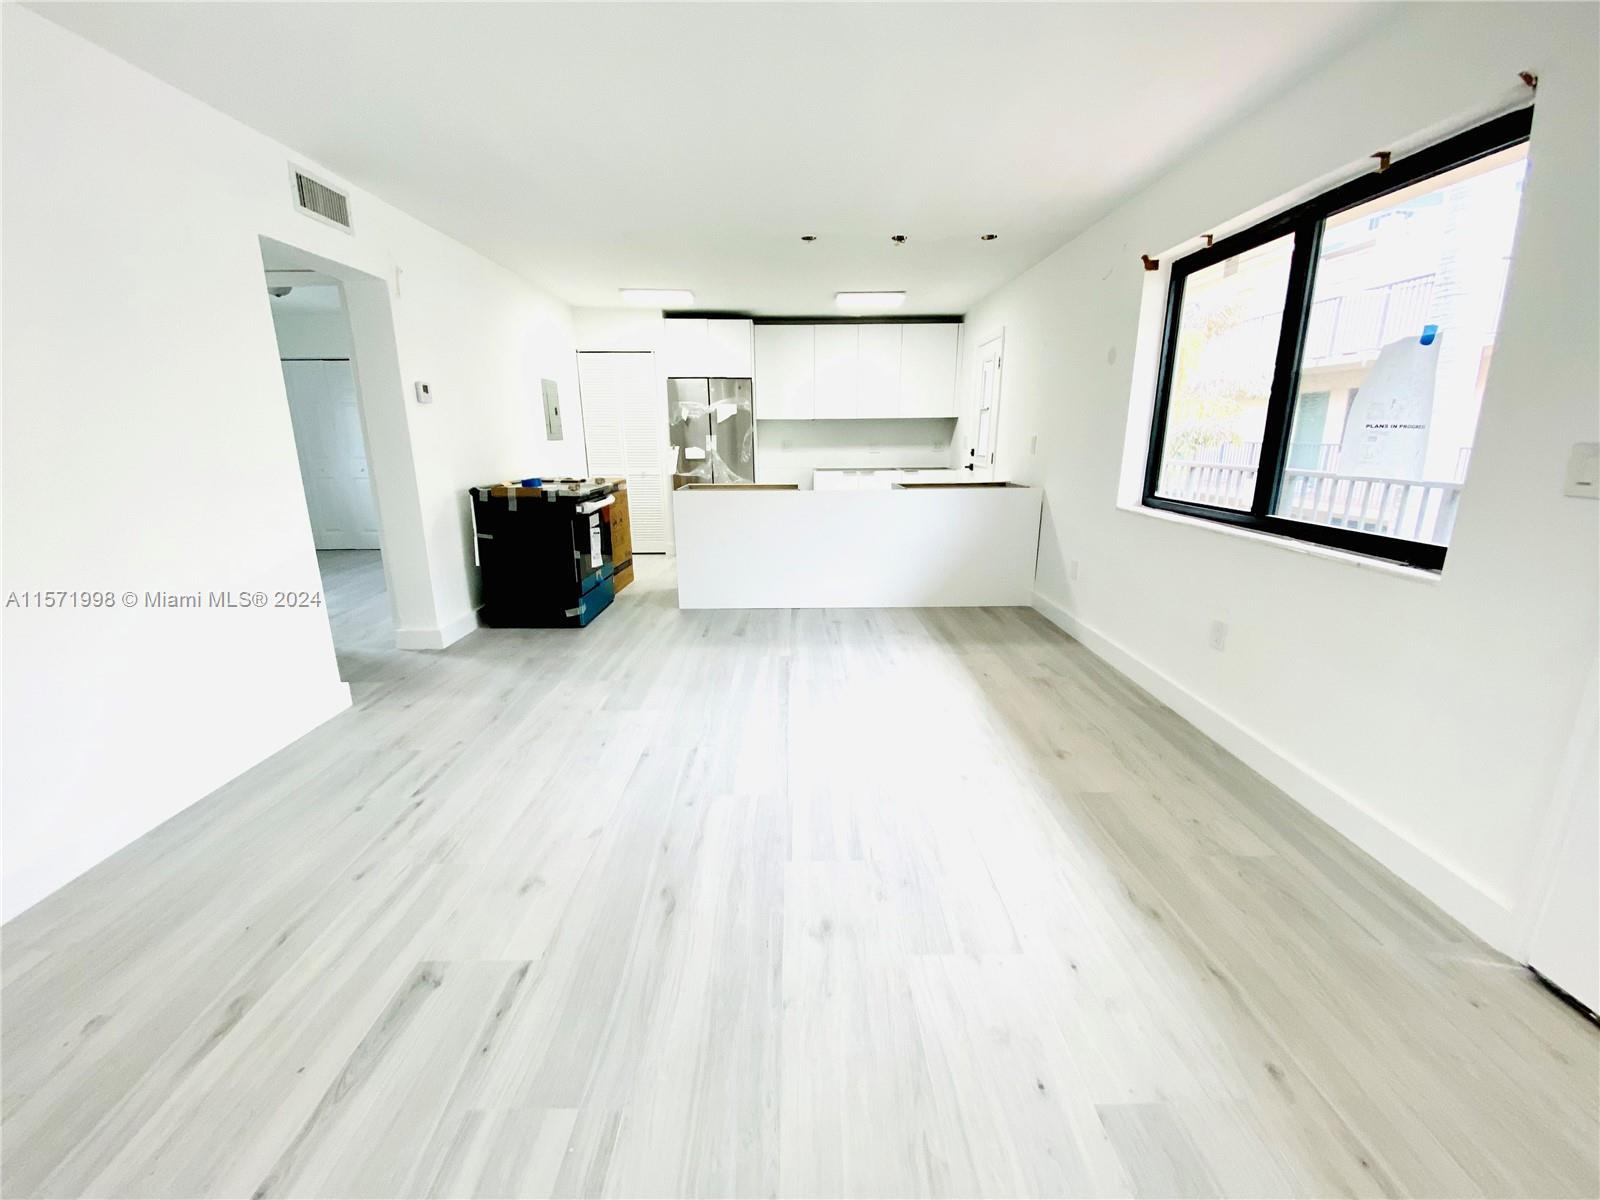 Photo of 3240 Mary St #S304 in Miami, FL